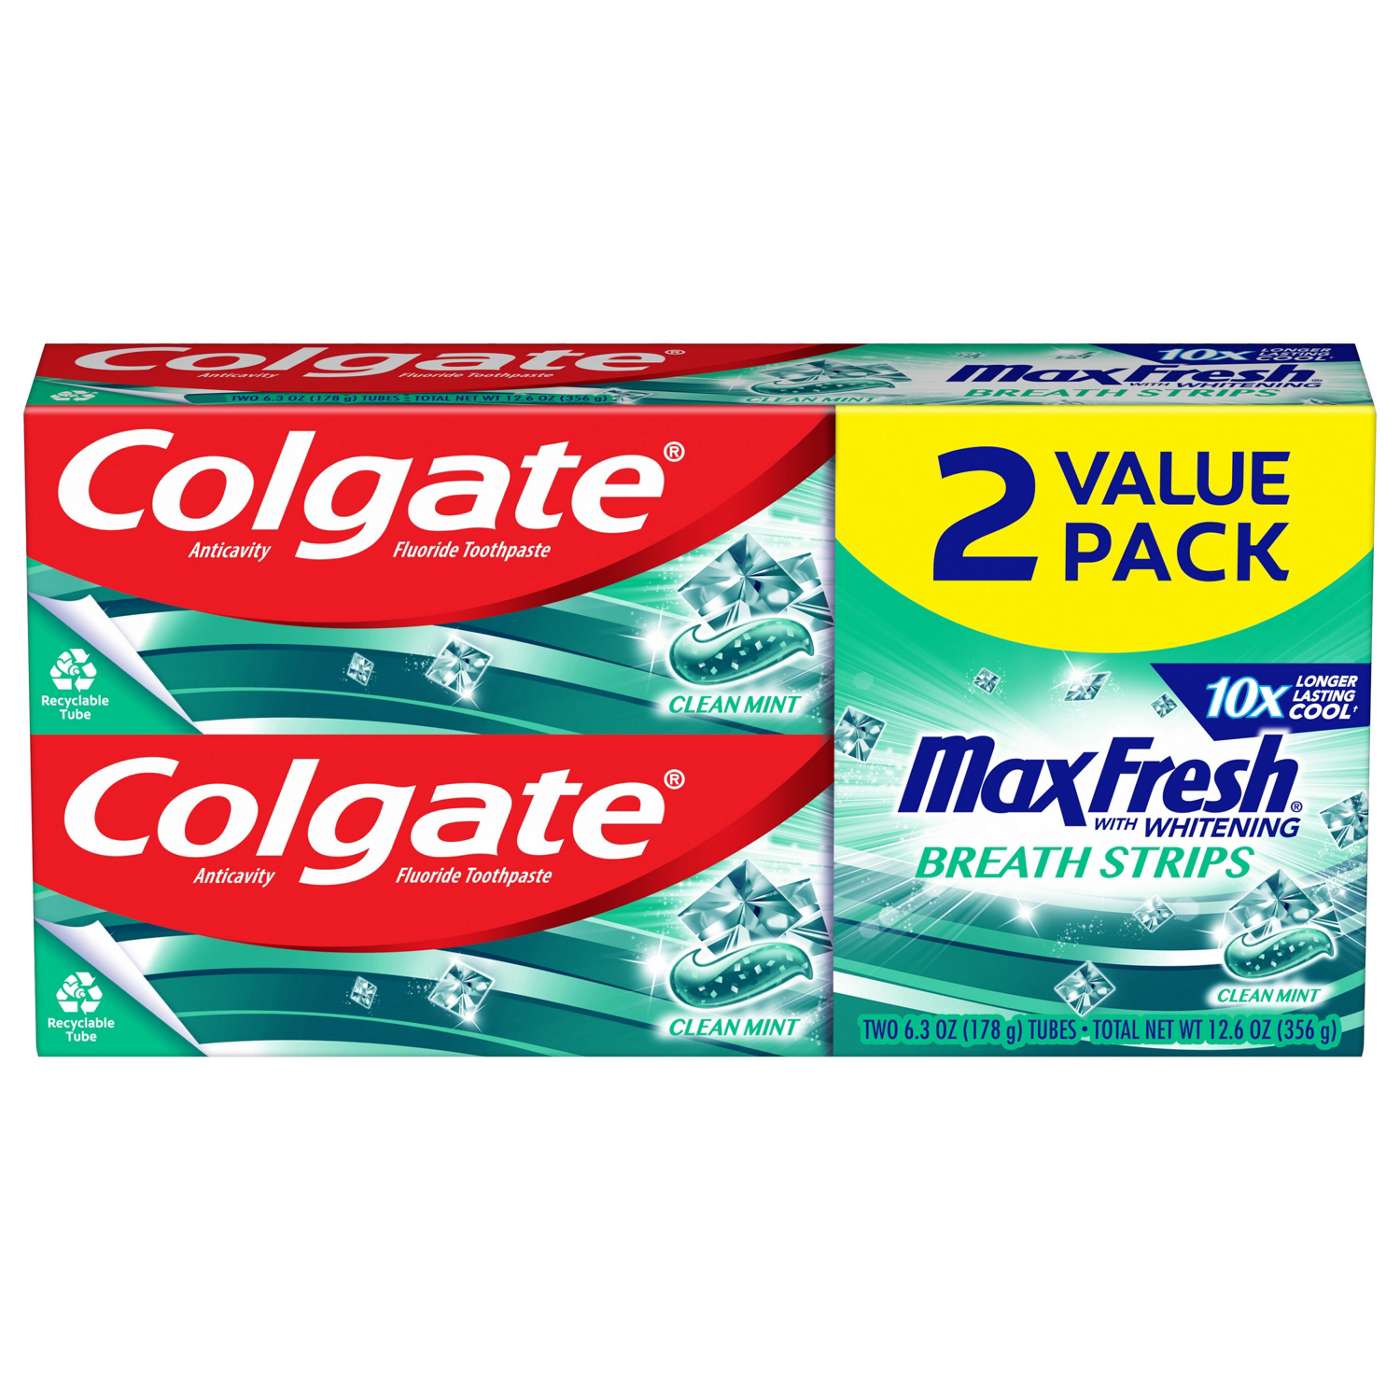 Colgate Max Fresh Anticavity Toothpaste 2 pk - Clean Mint; image 1 of 7